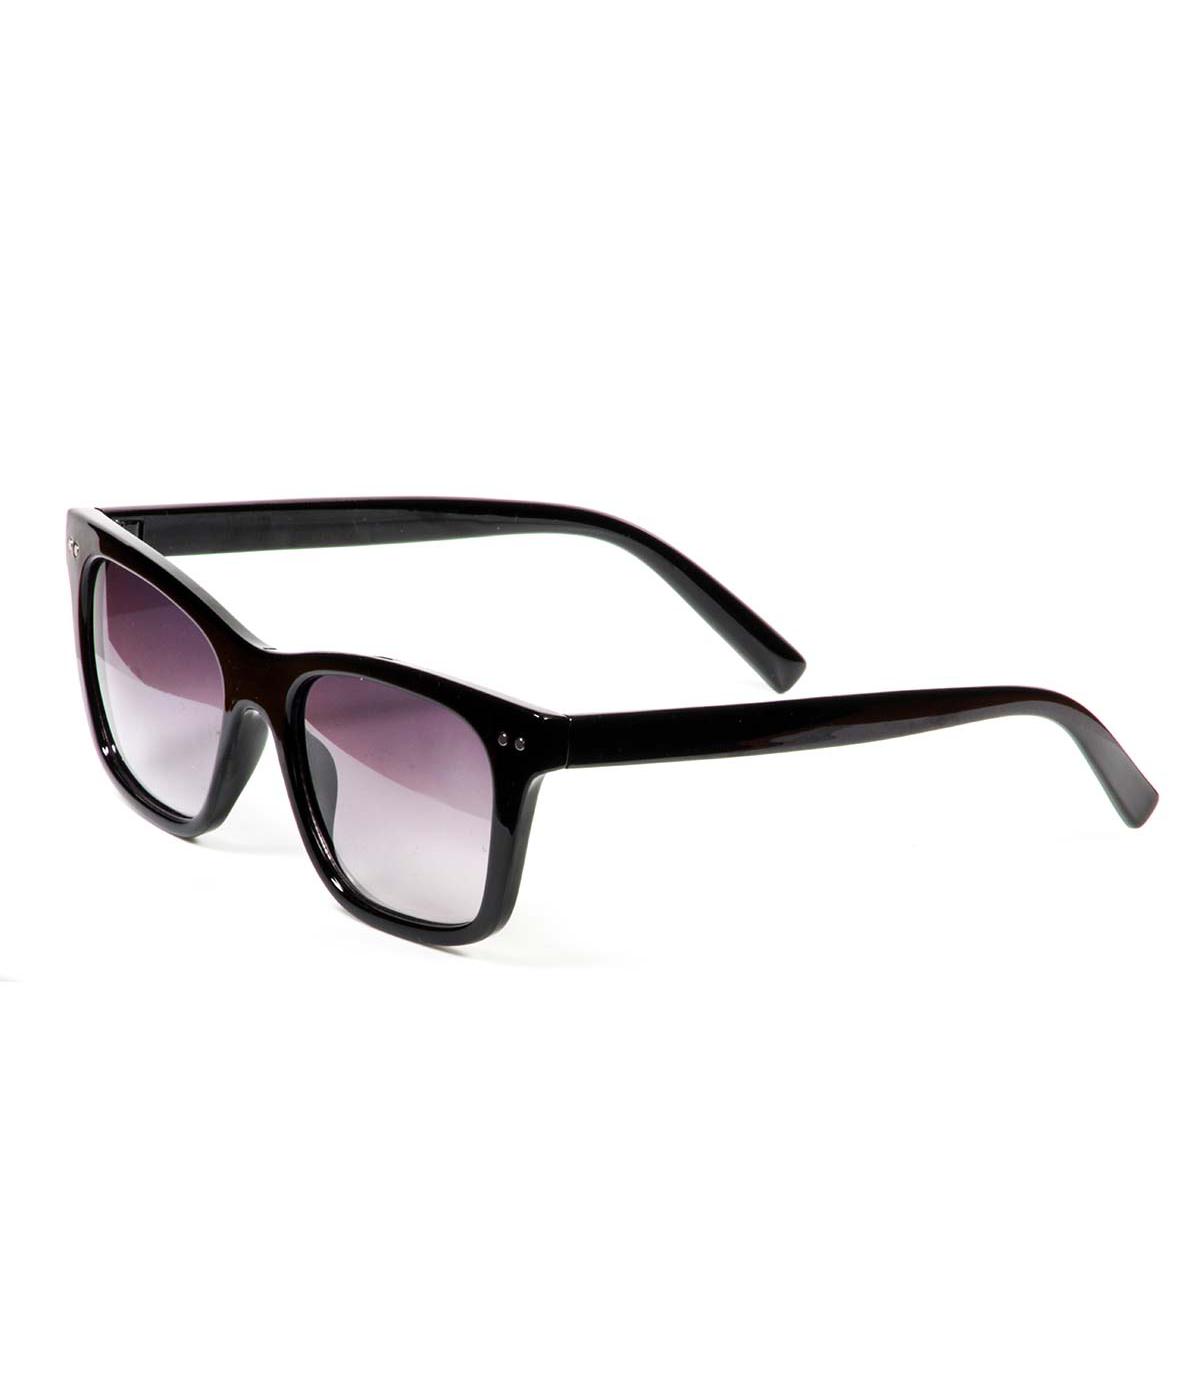 Select A Vision Women's Mod Rectangle Sunglasses; image 2 of 2